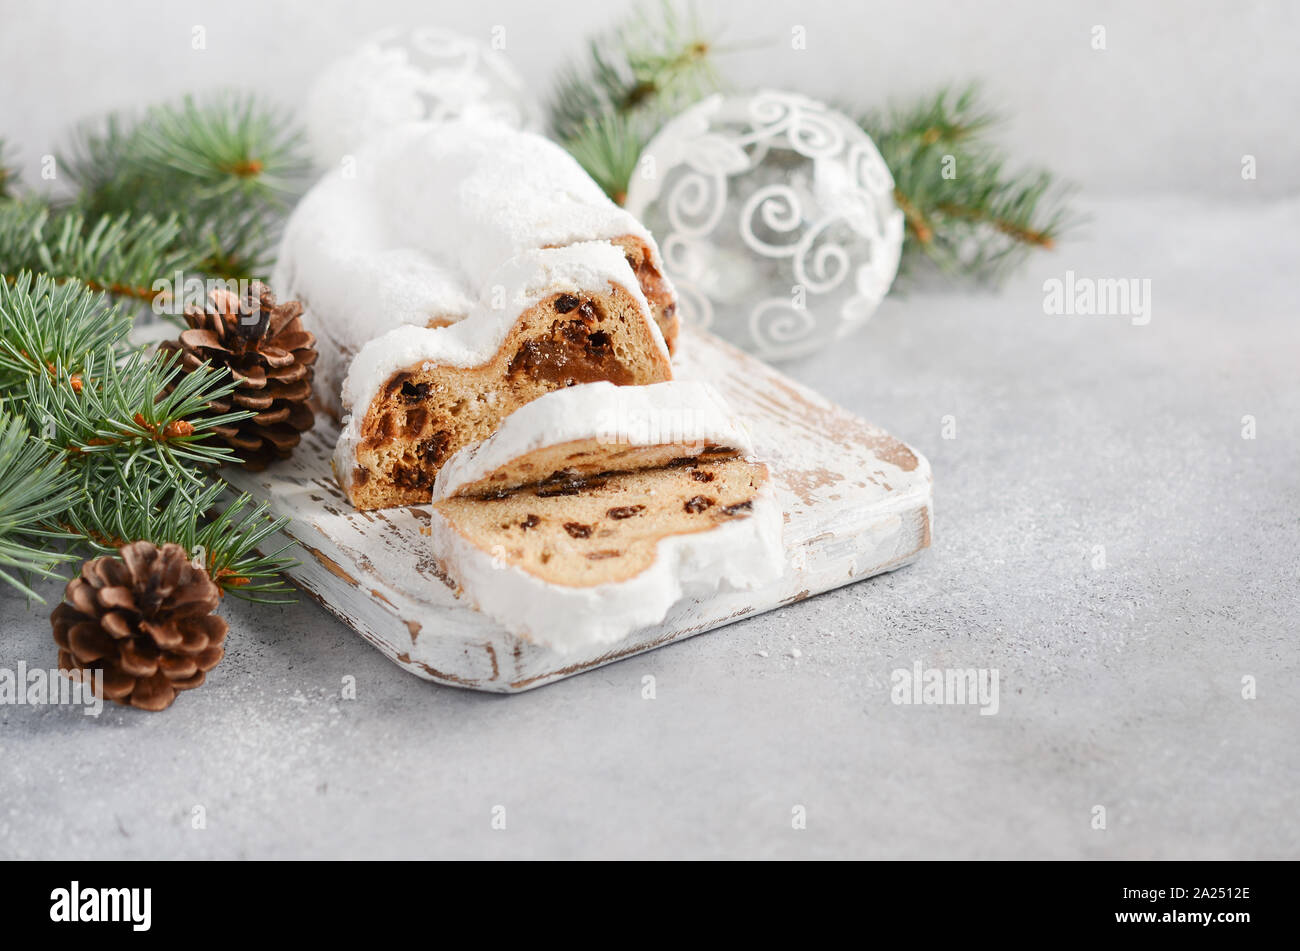 Christmas Stollen. Traditional German, European Festive Dessert. Holiday Concept Decorated with Fir Branches. Stock Photo